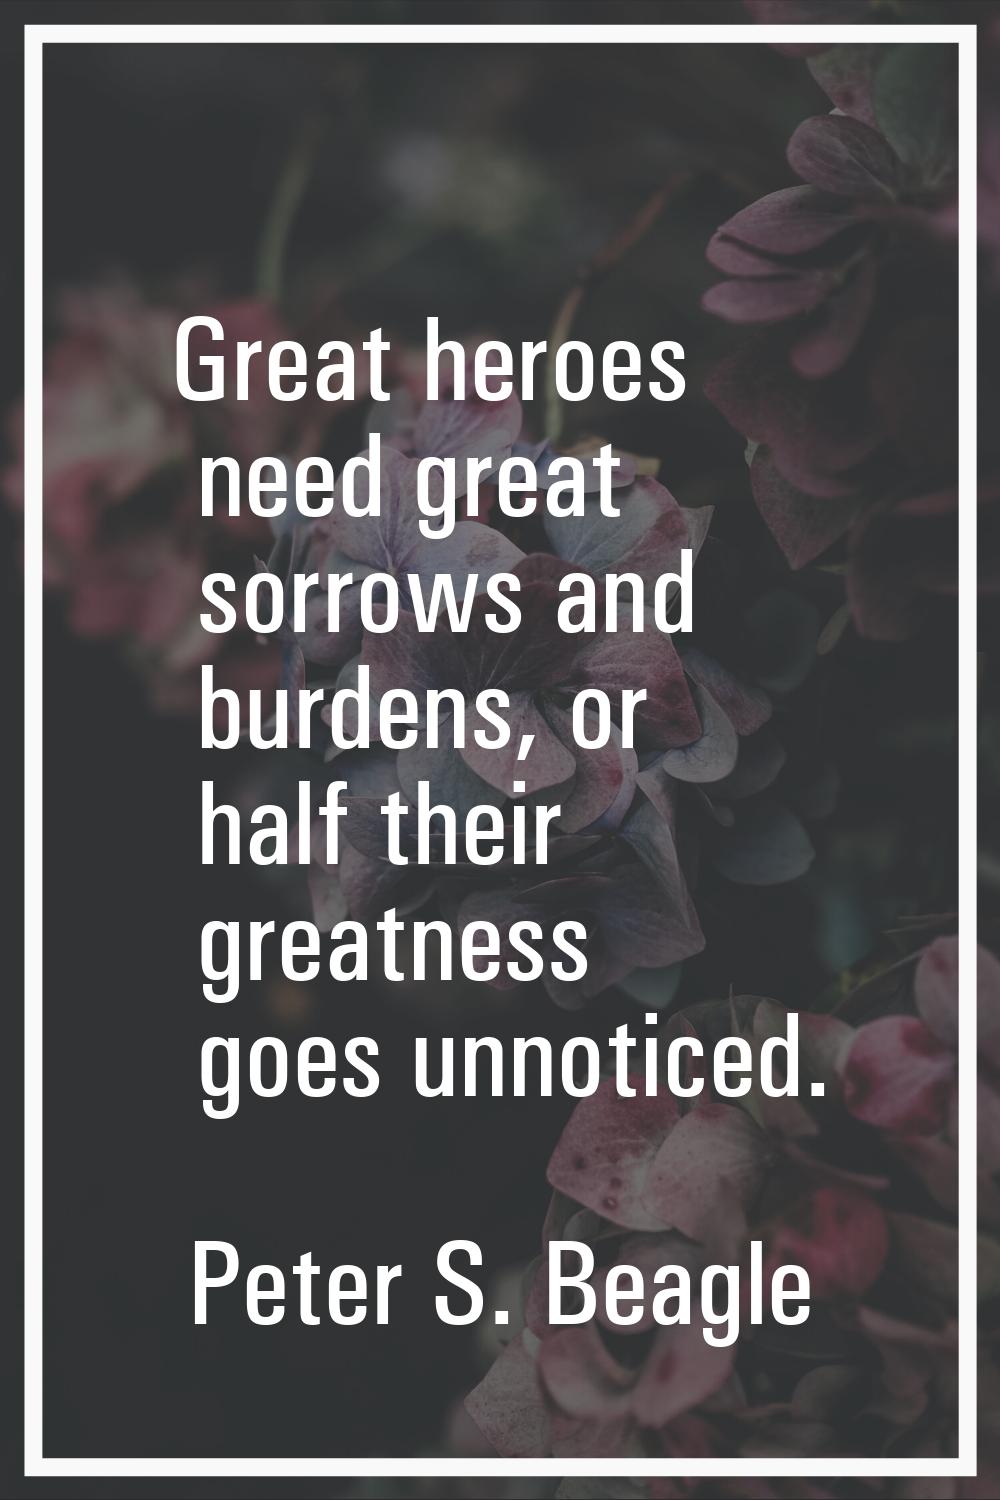 Great heroes need great sorrows and burdens, or half their greatness goes unnoticed.